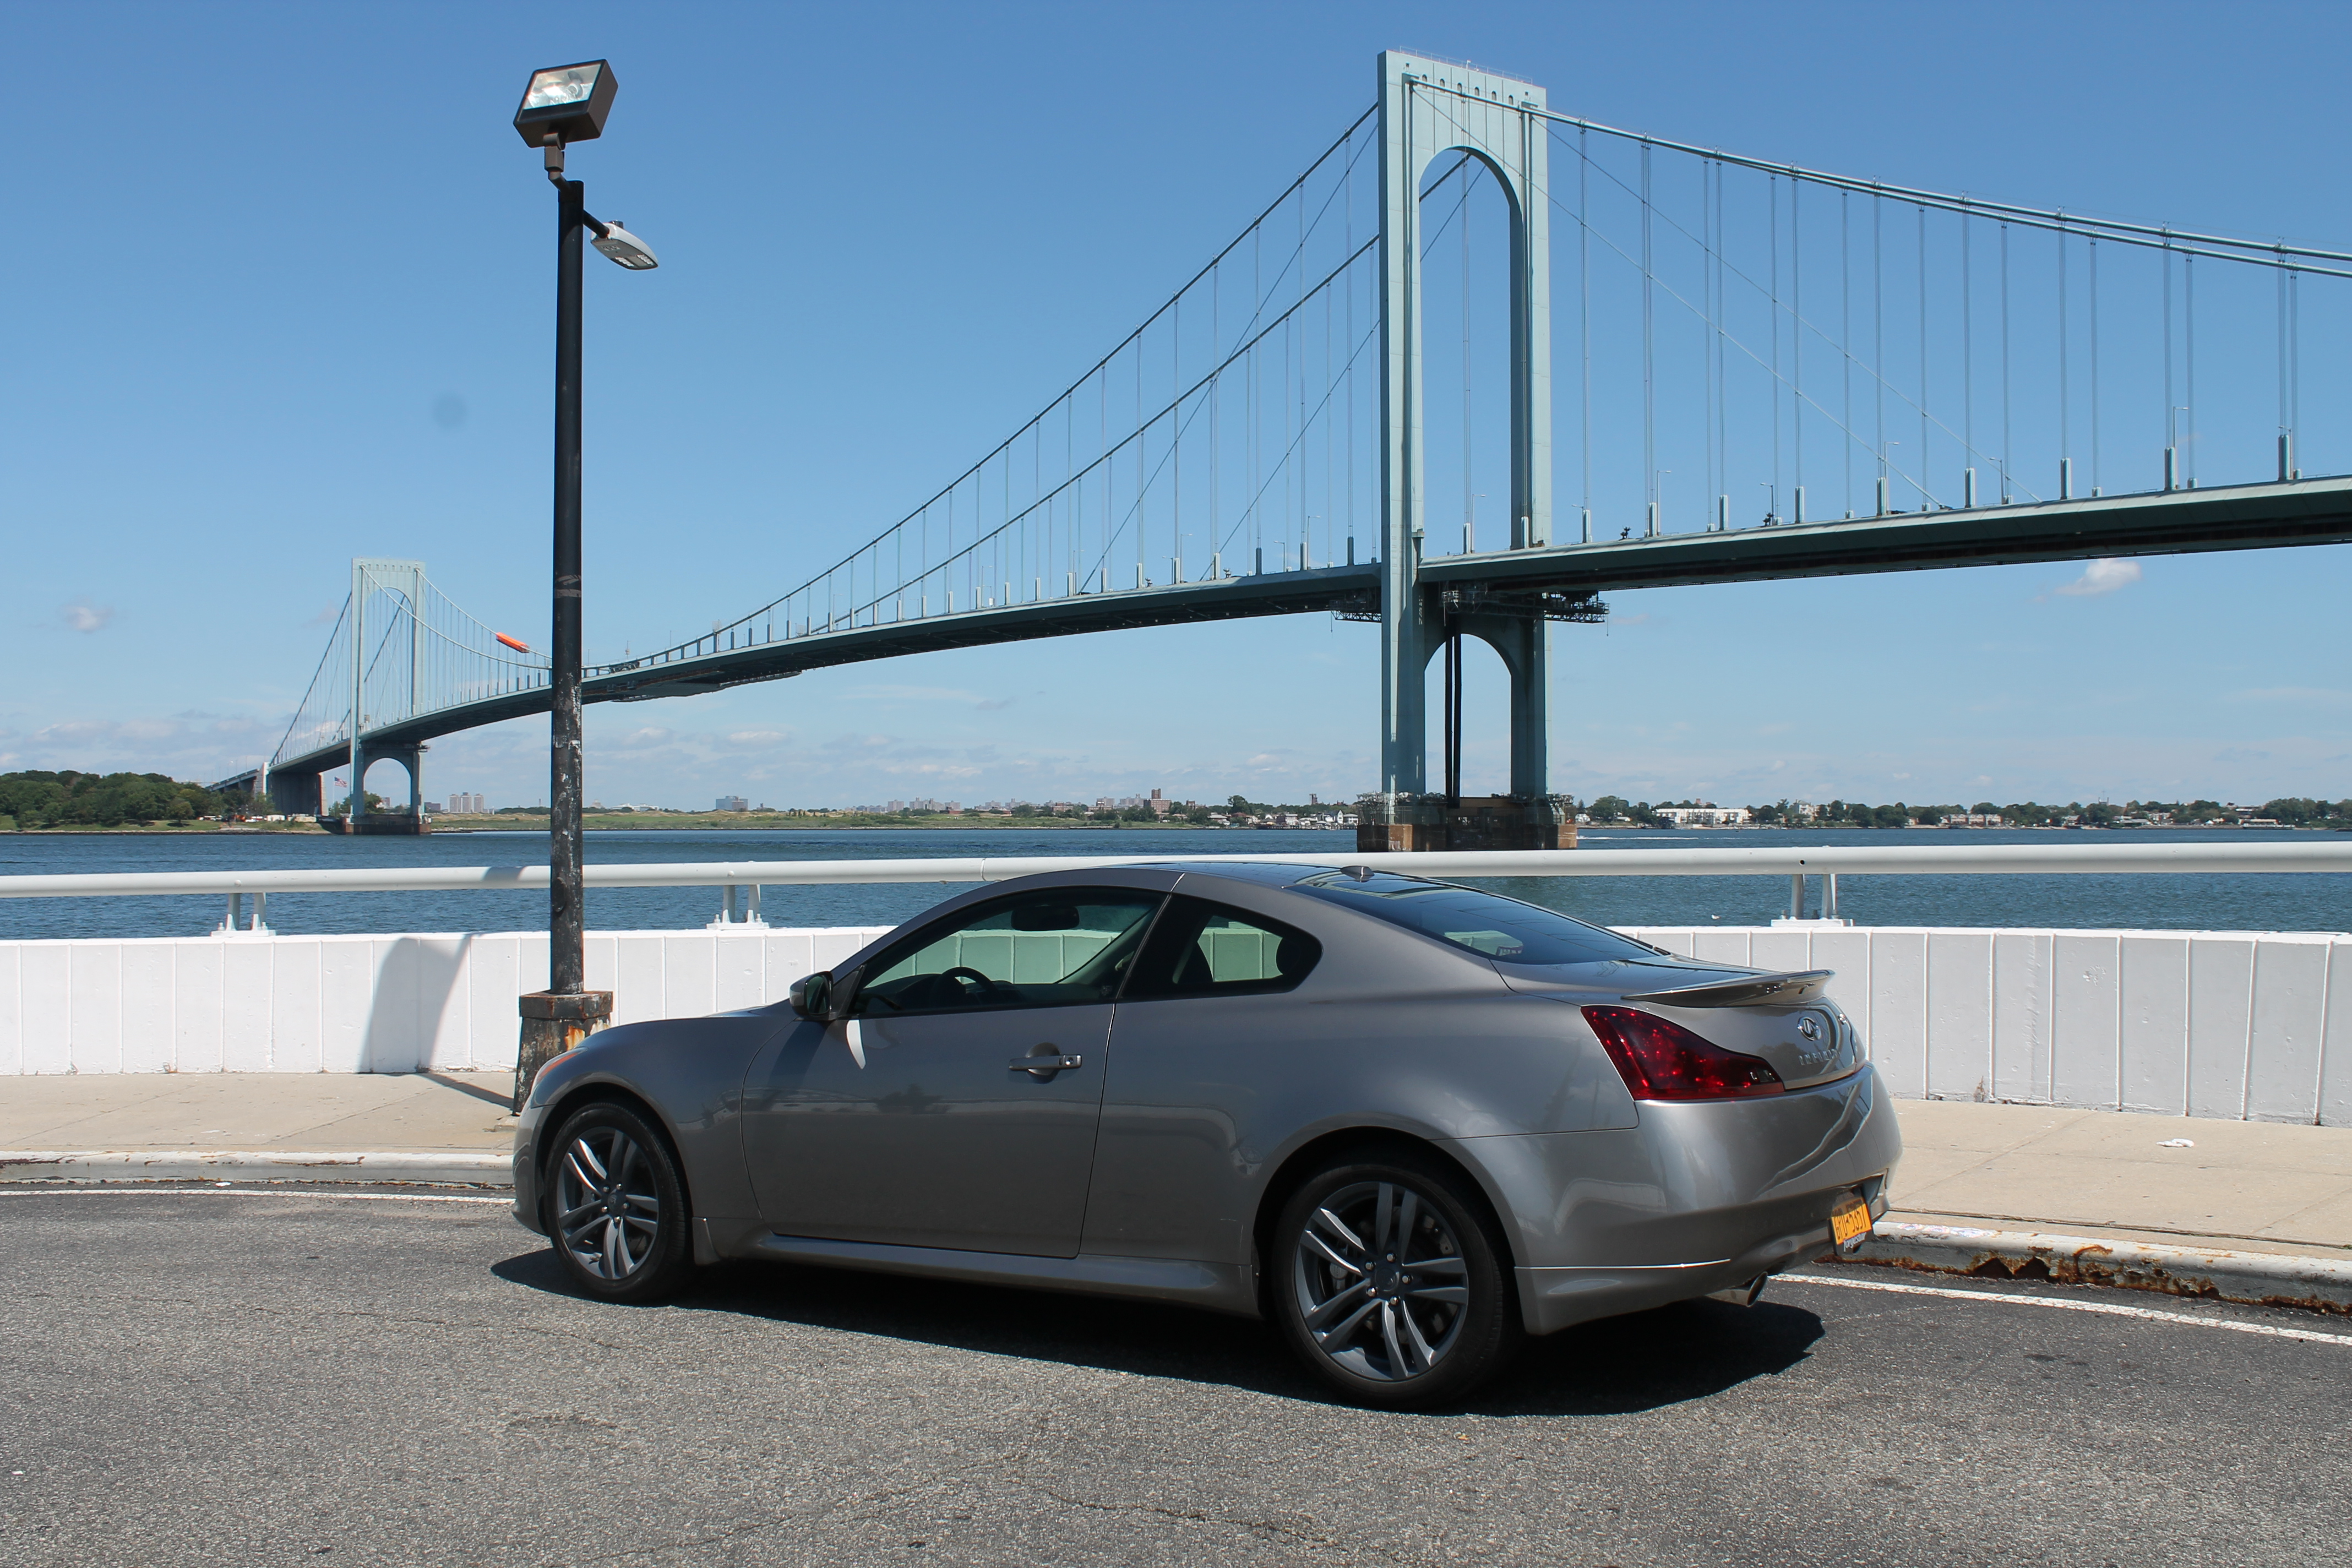 G37+Owner's+Manual 2008 G37S Coupe 6MT - Too Many Mods! - Build Thread ...